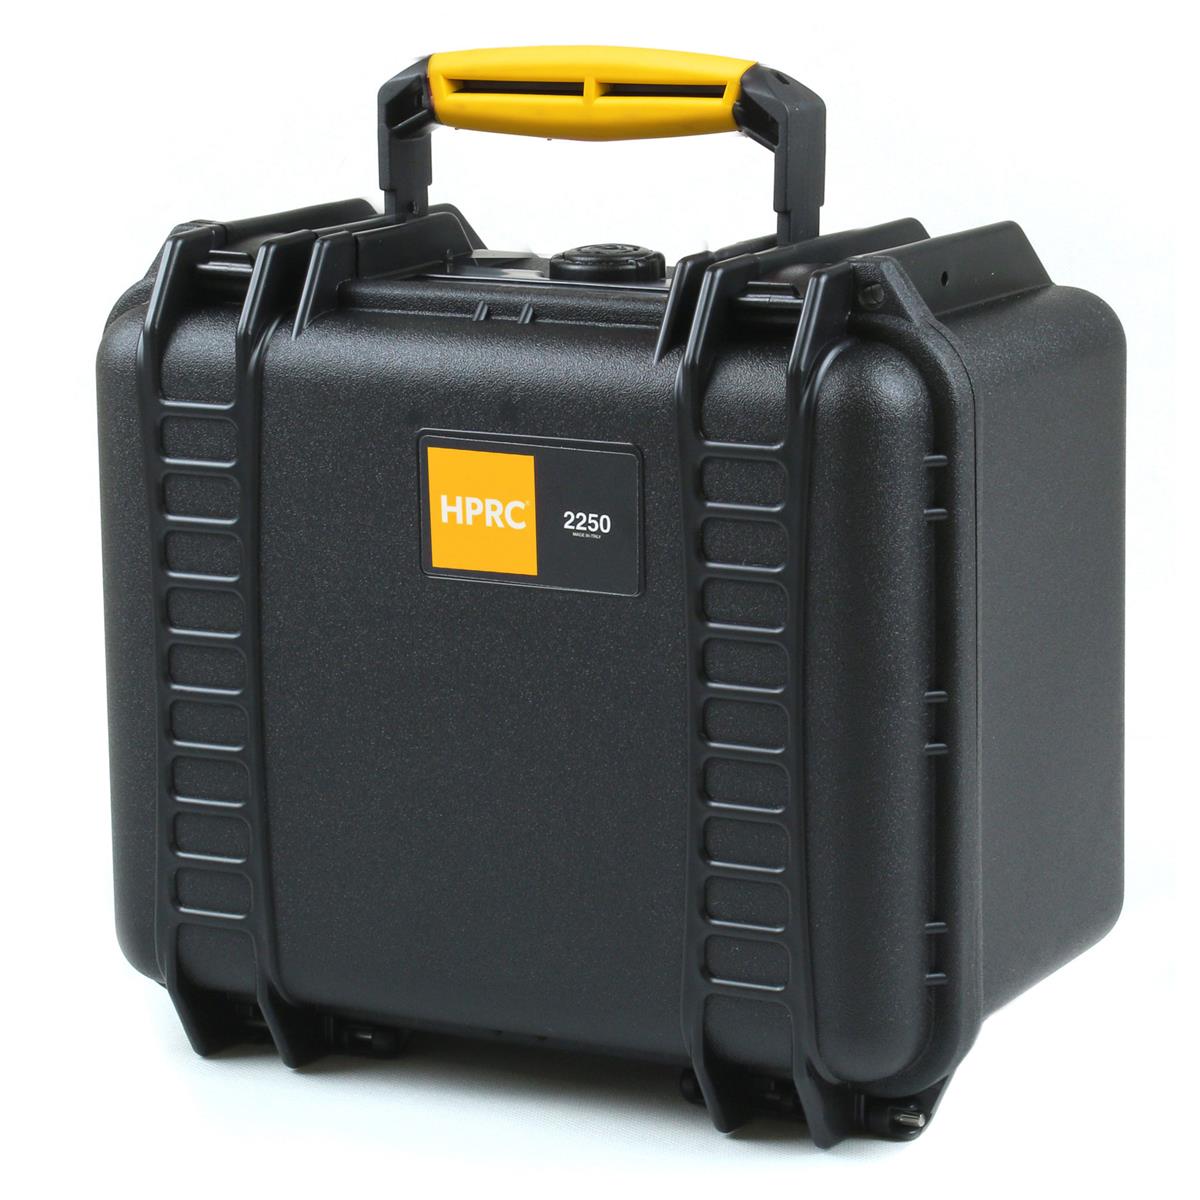 

HPRC 2250 Hard Case with Foam for 6x Handheld Microphones, Black w/Yellow Handle